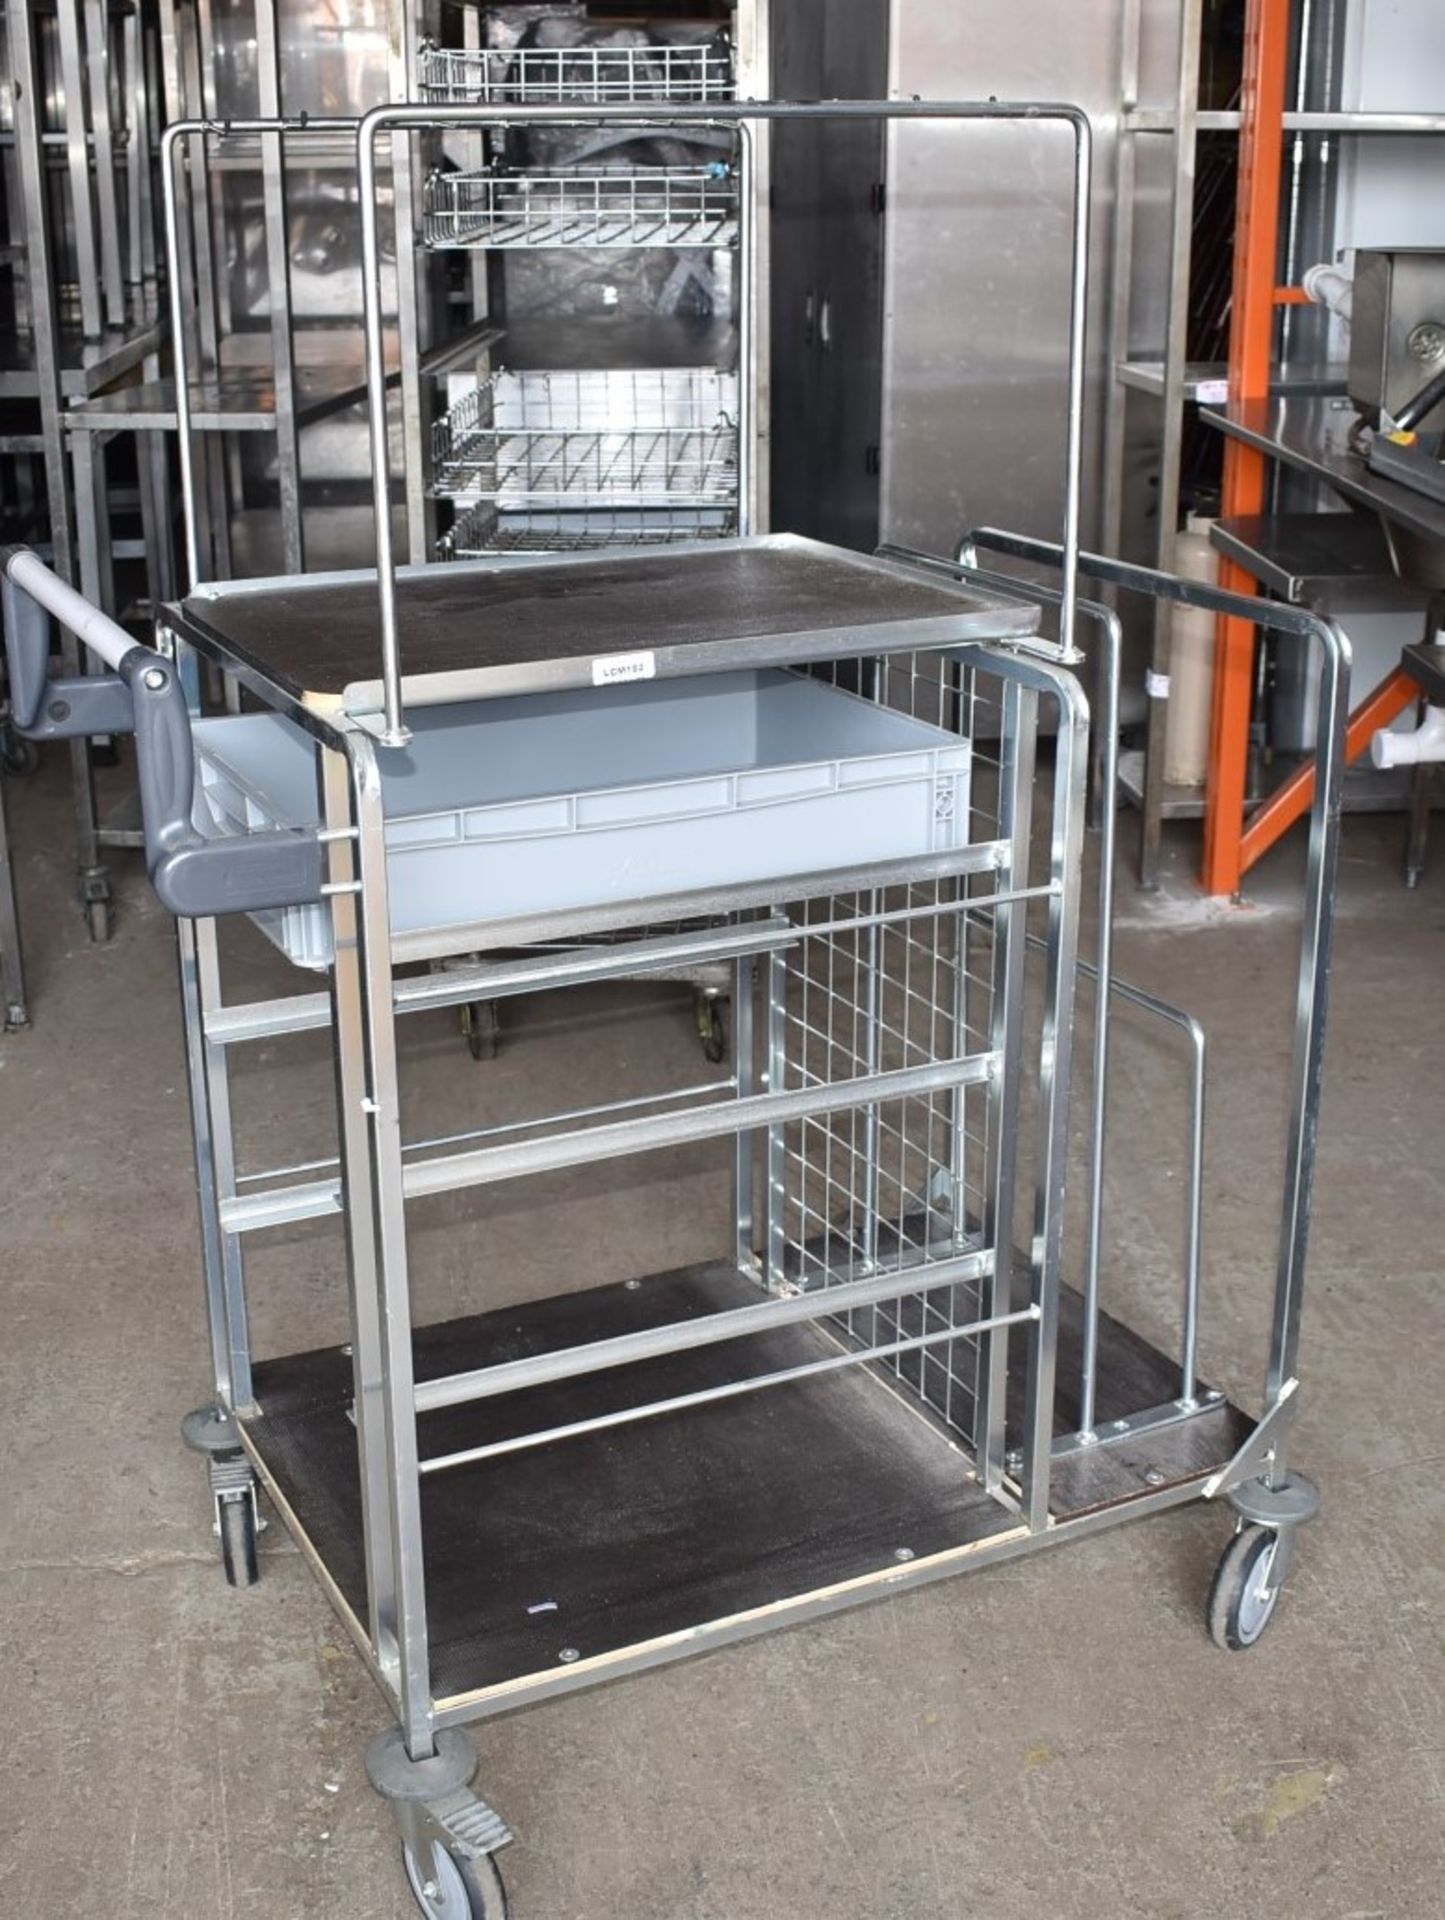 1 x Pickers Warehouse Trolley - Dimensions: H106 x W100 x D60 cms - Recently Removed From Major